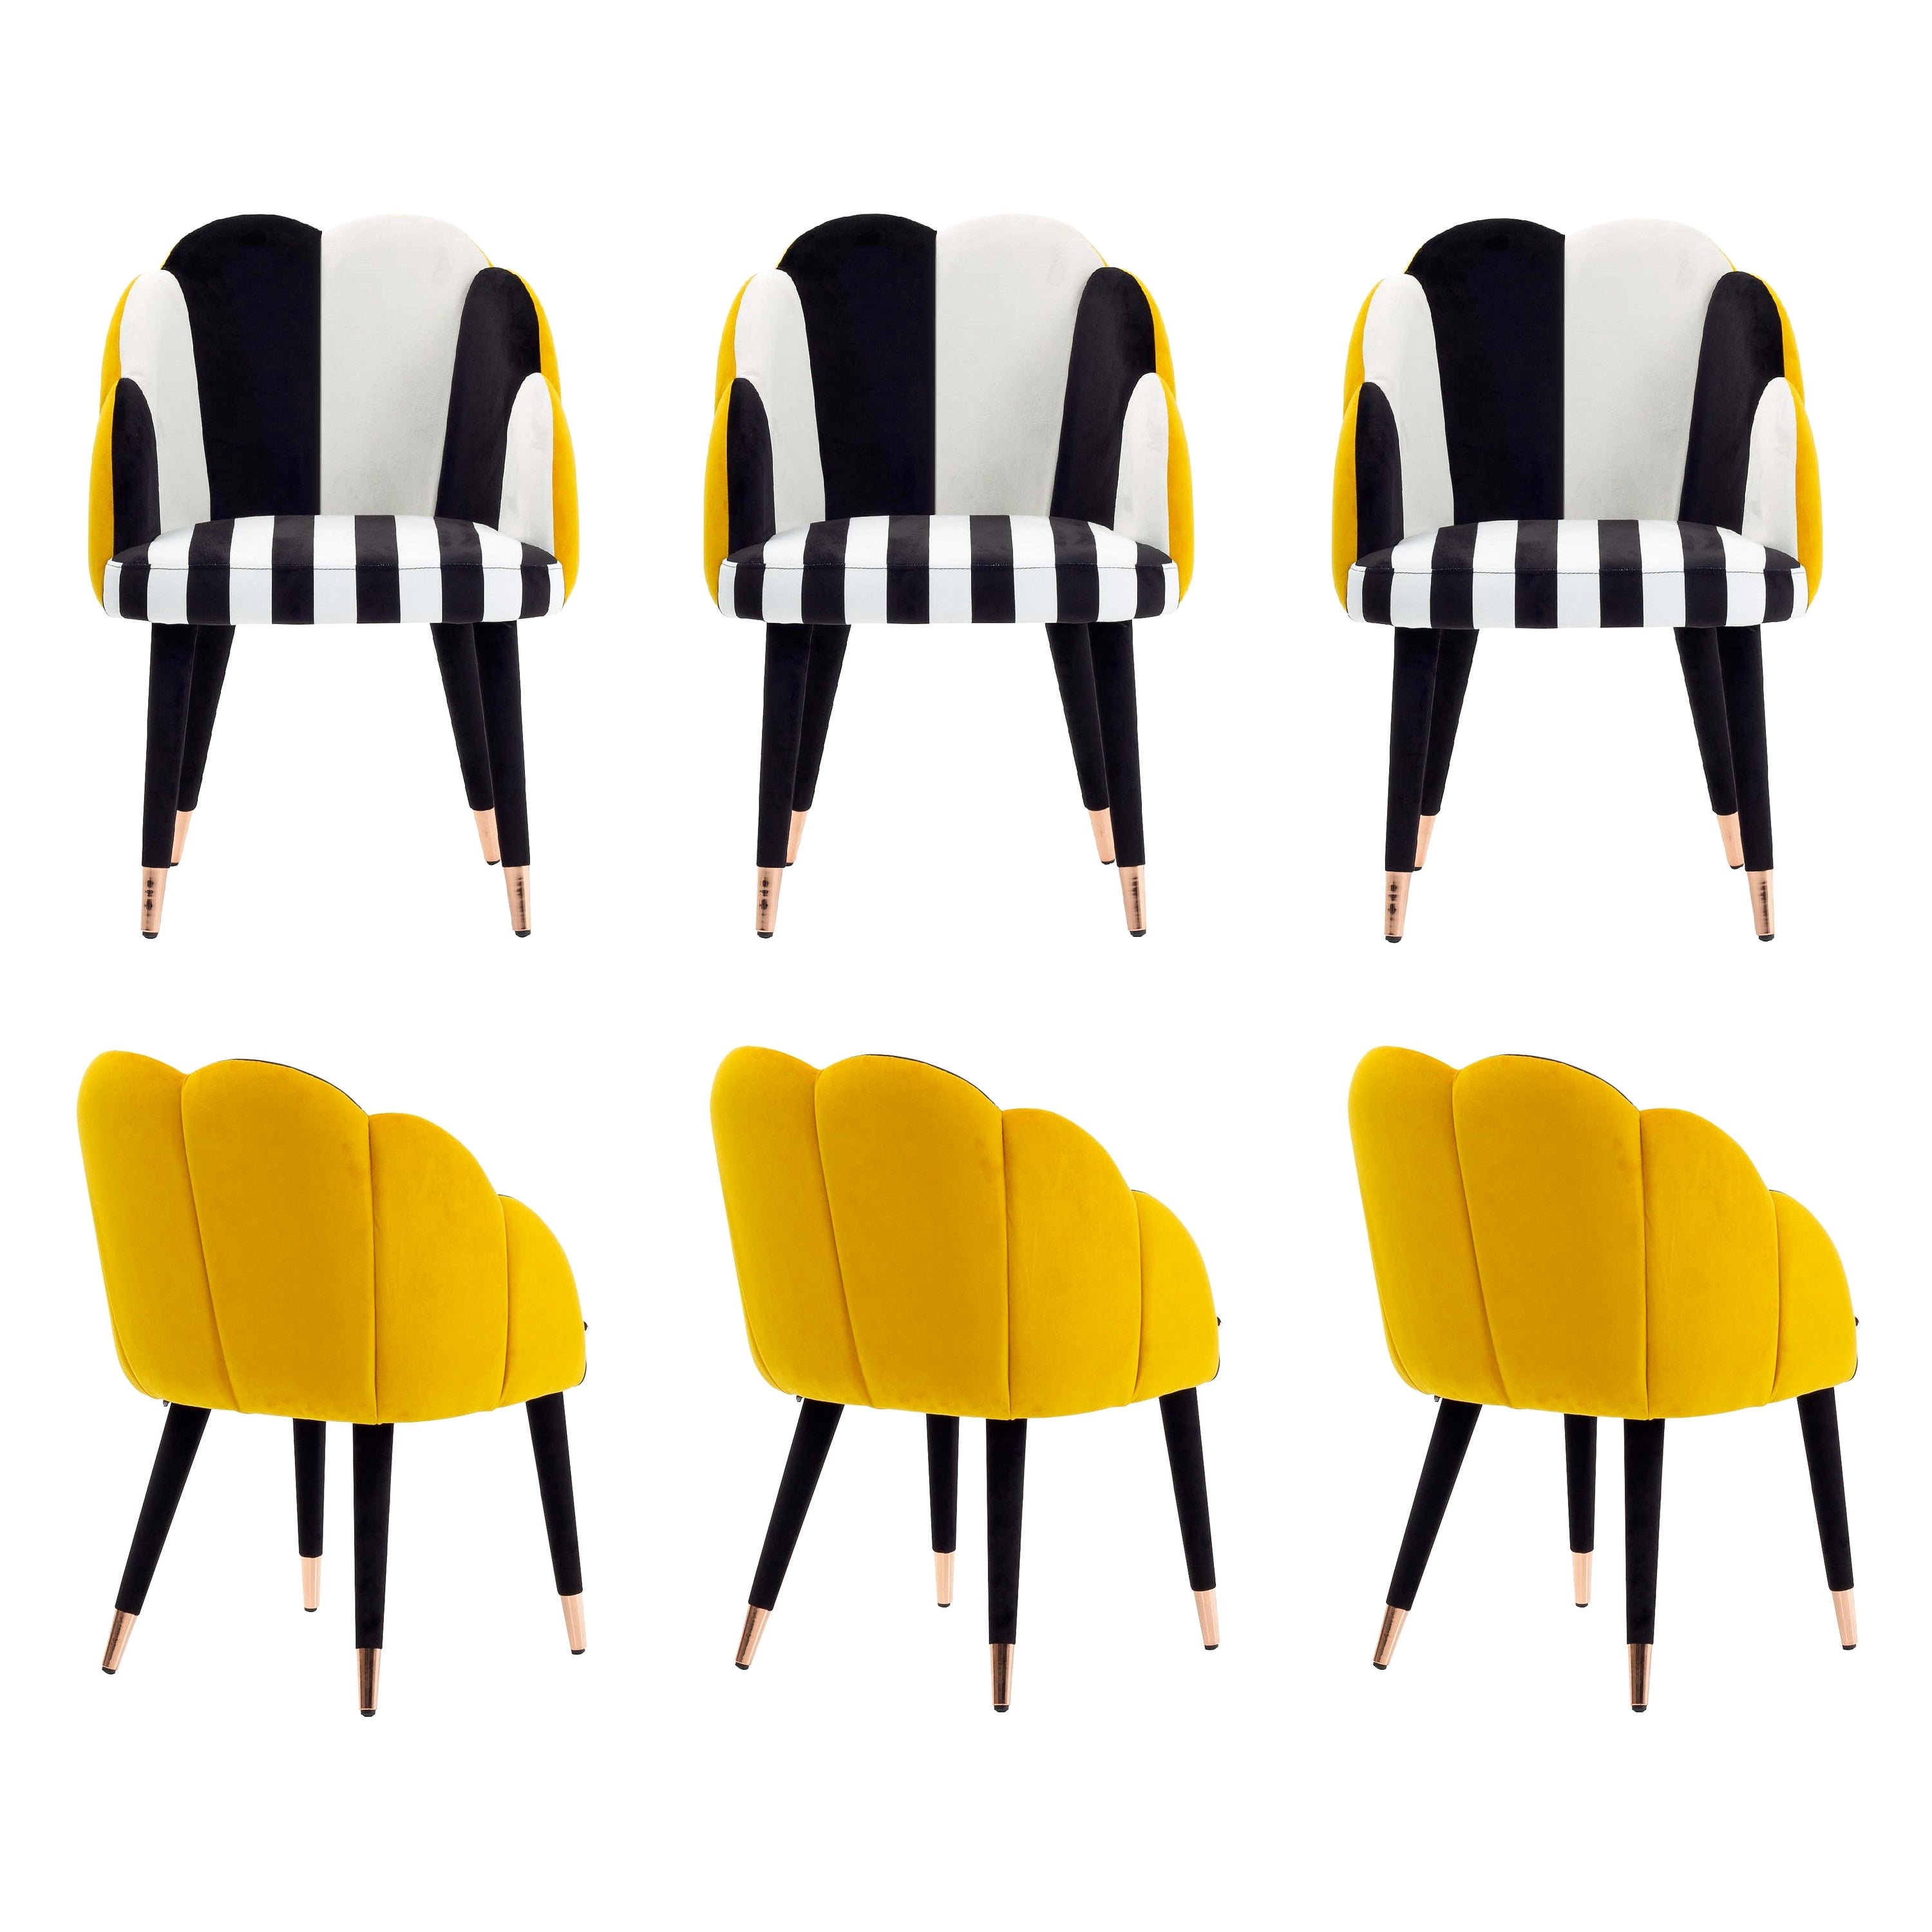 In Stock Contemporary Dining Chairs, Set of 6 in yellow, black and white